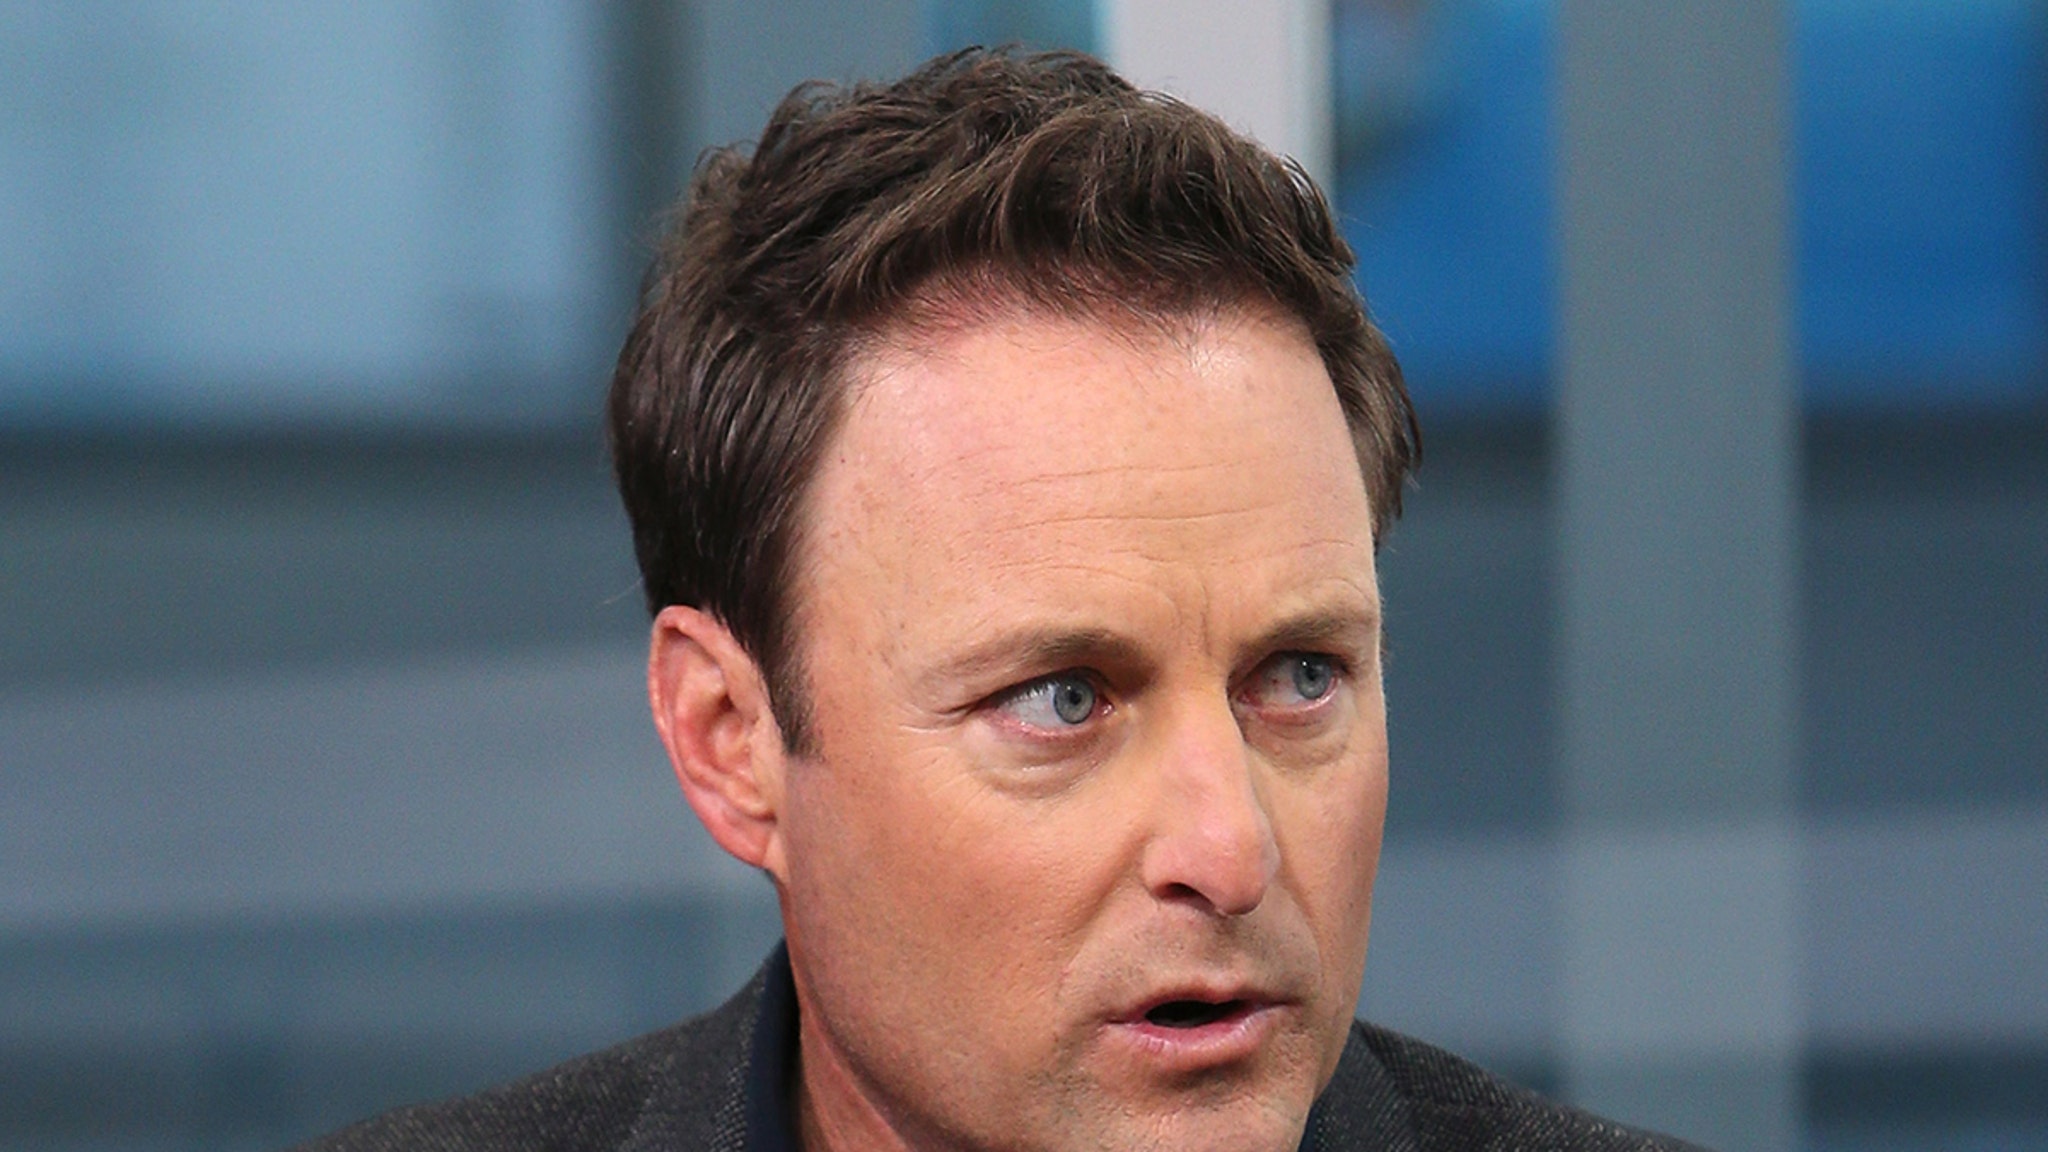 Chris Harrison hires powerful lawyer over ‘dispute’